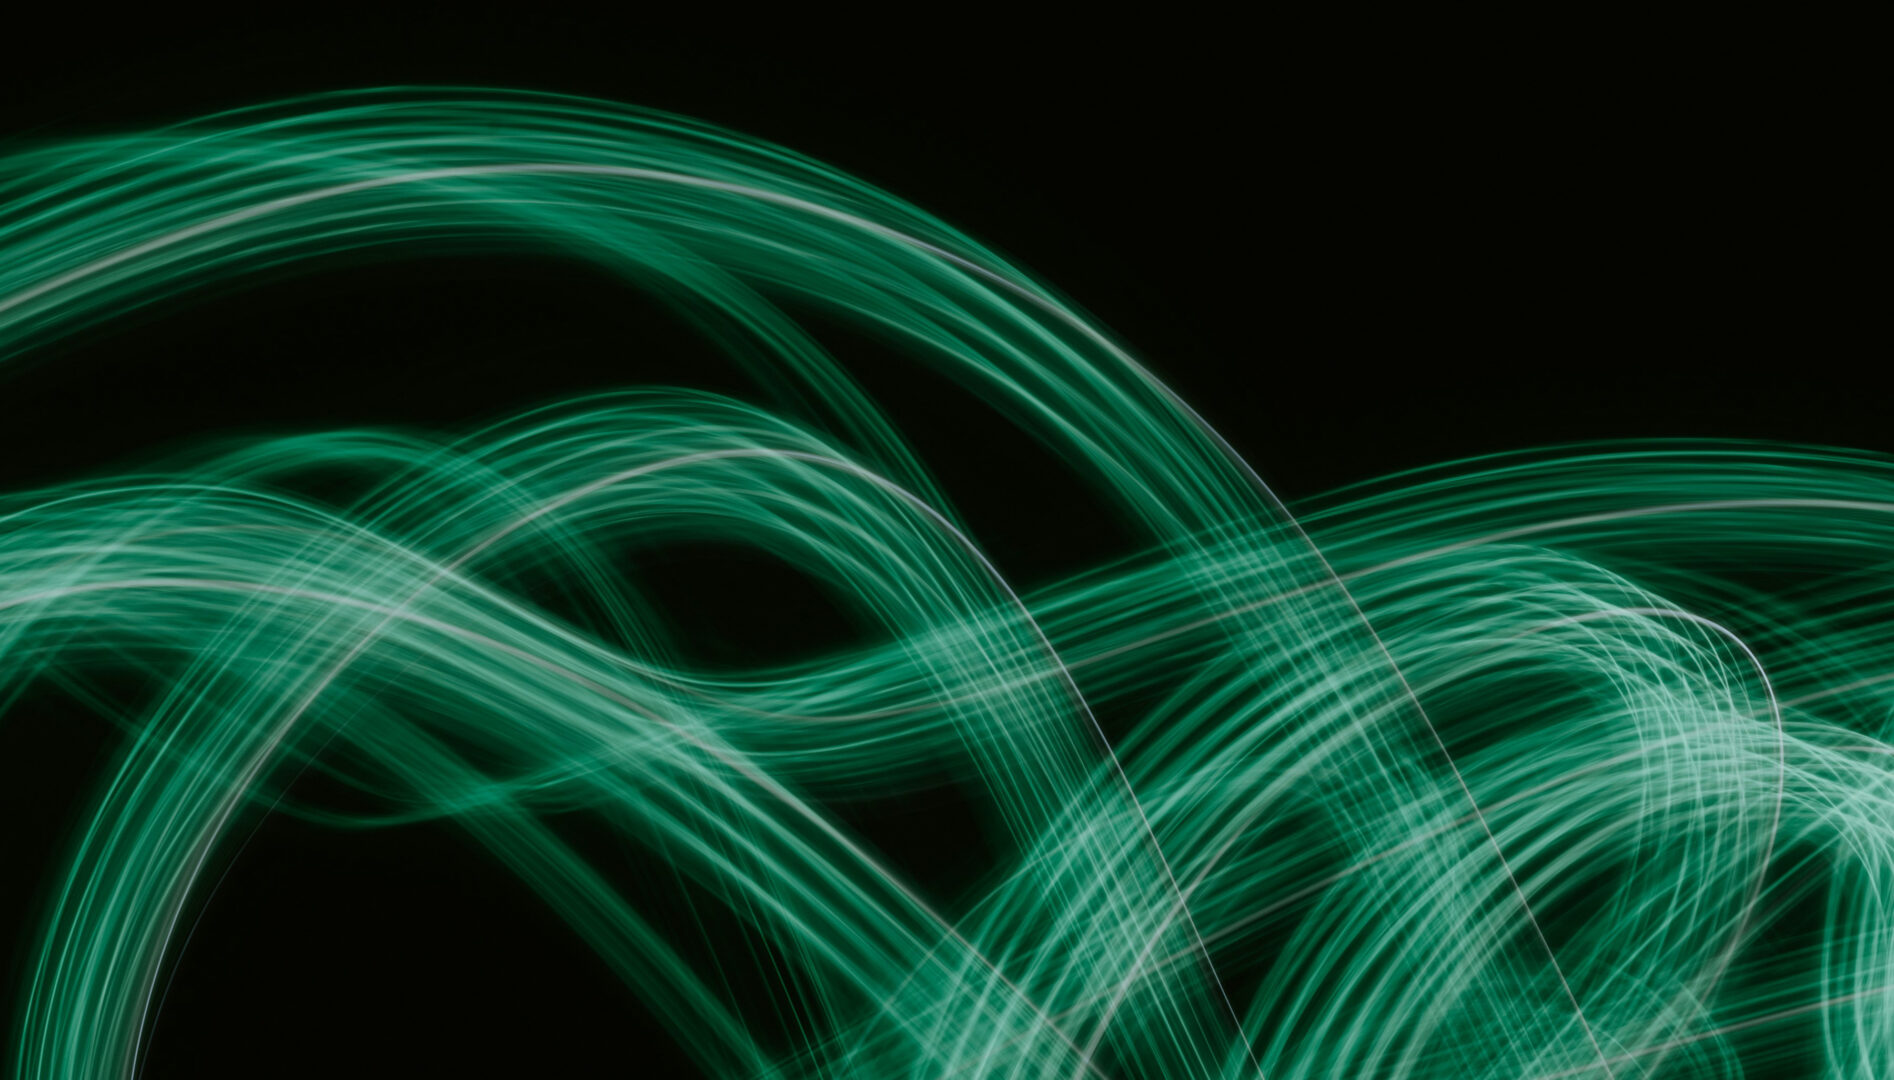 Abstract green lines on a black background